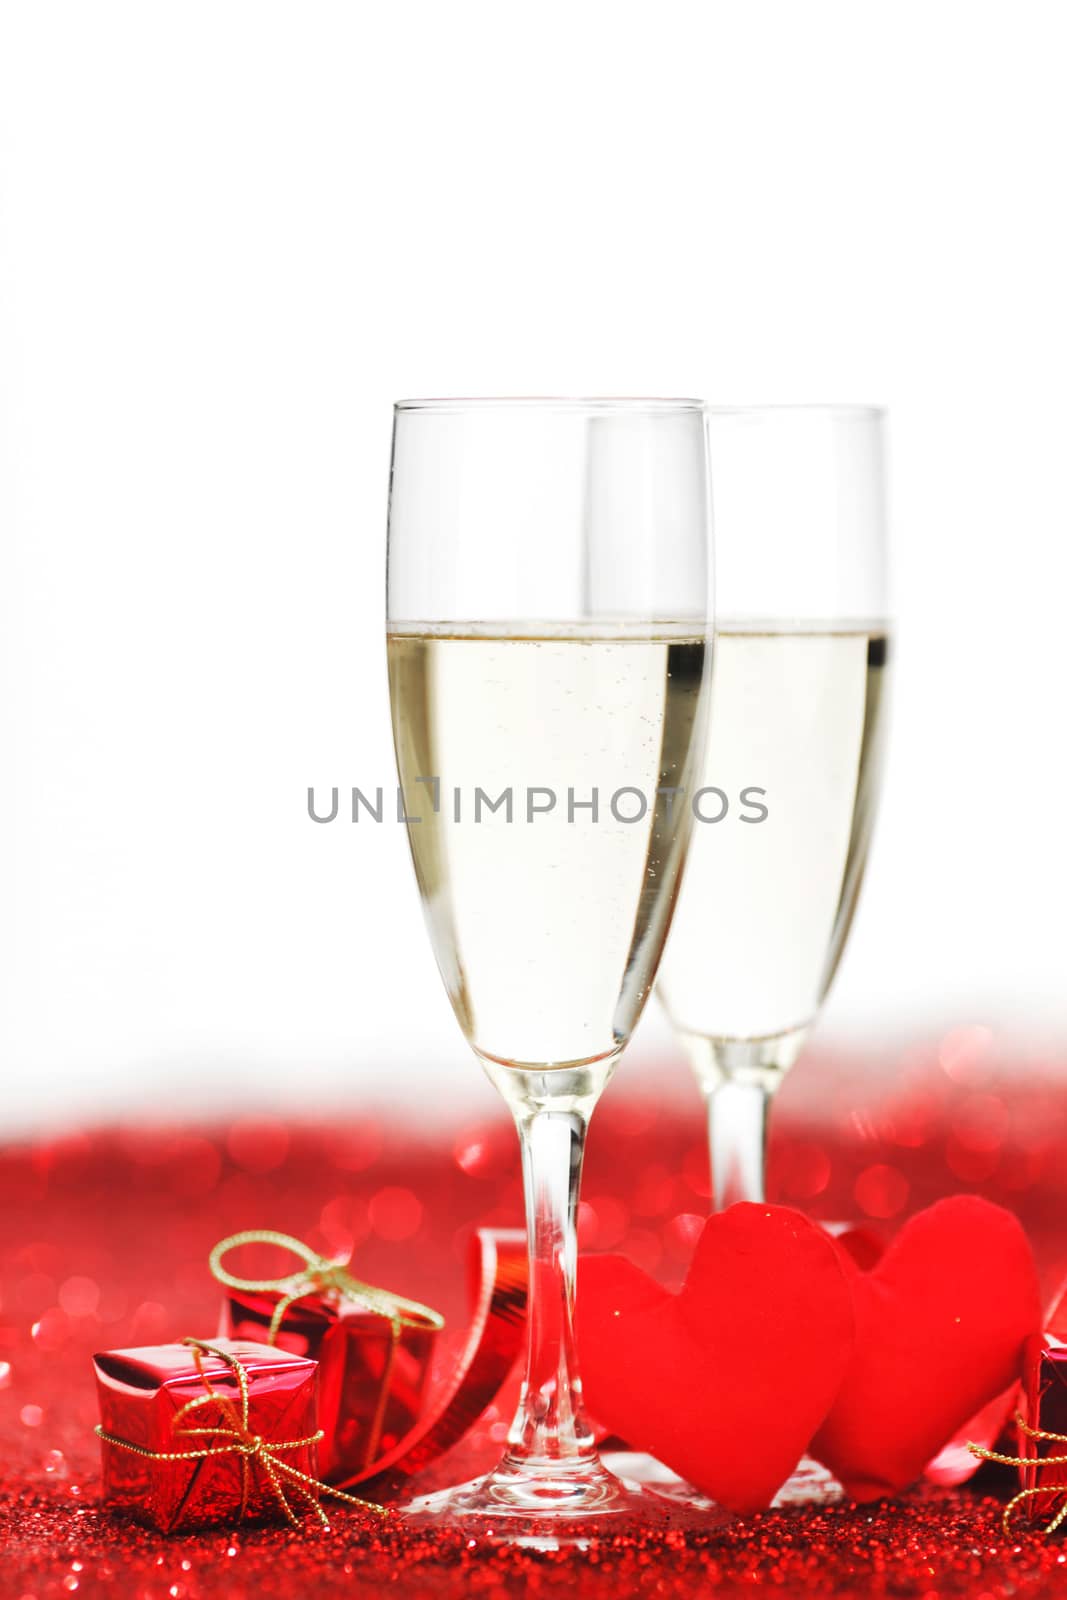 Two glasses of champagne with red decor, Valentines day concept